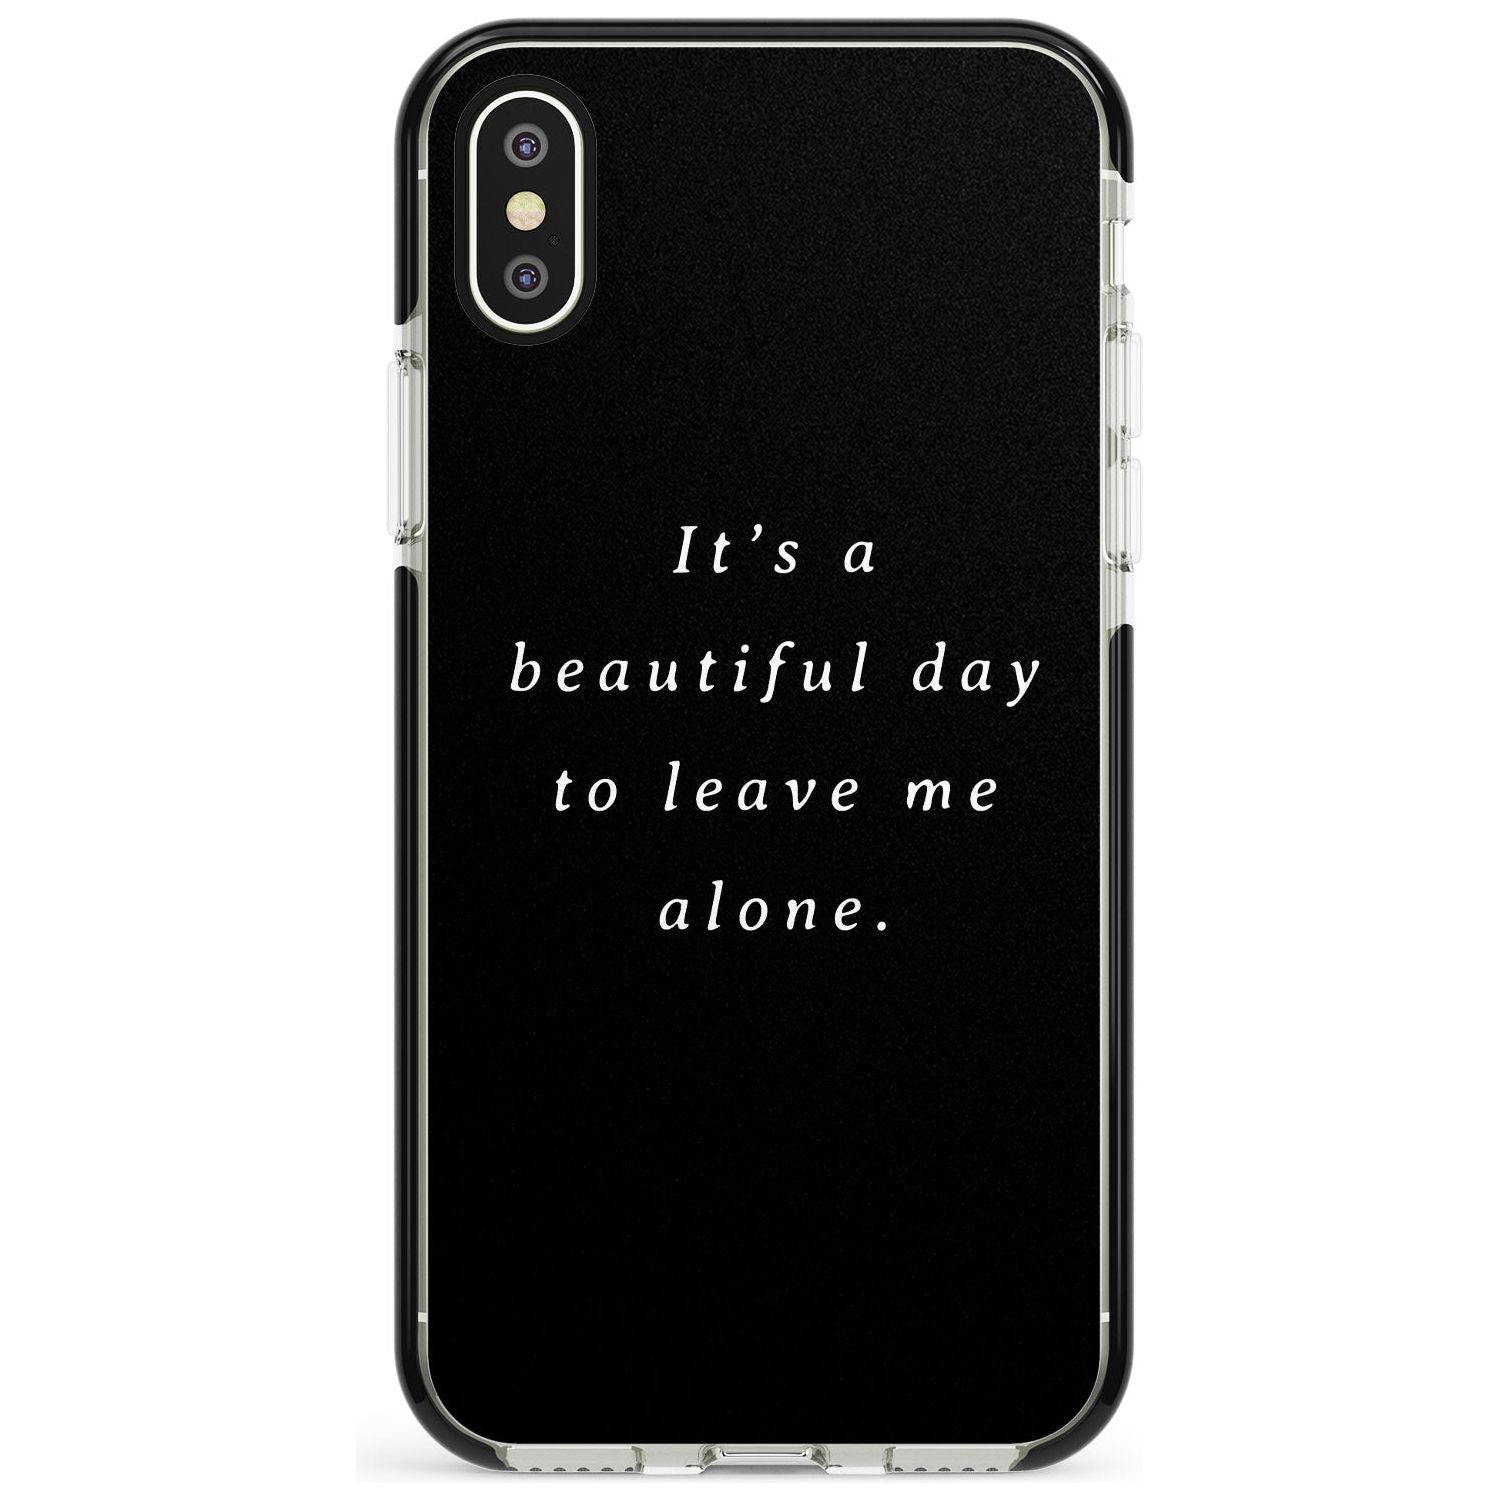 Leave me alone Black Impact Phone Case for iPhone X XS Max XR